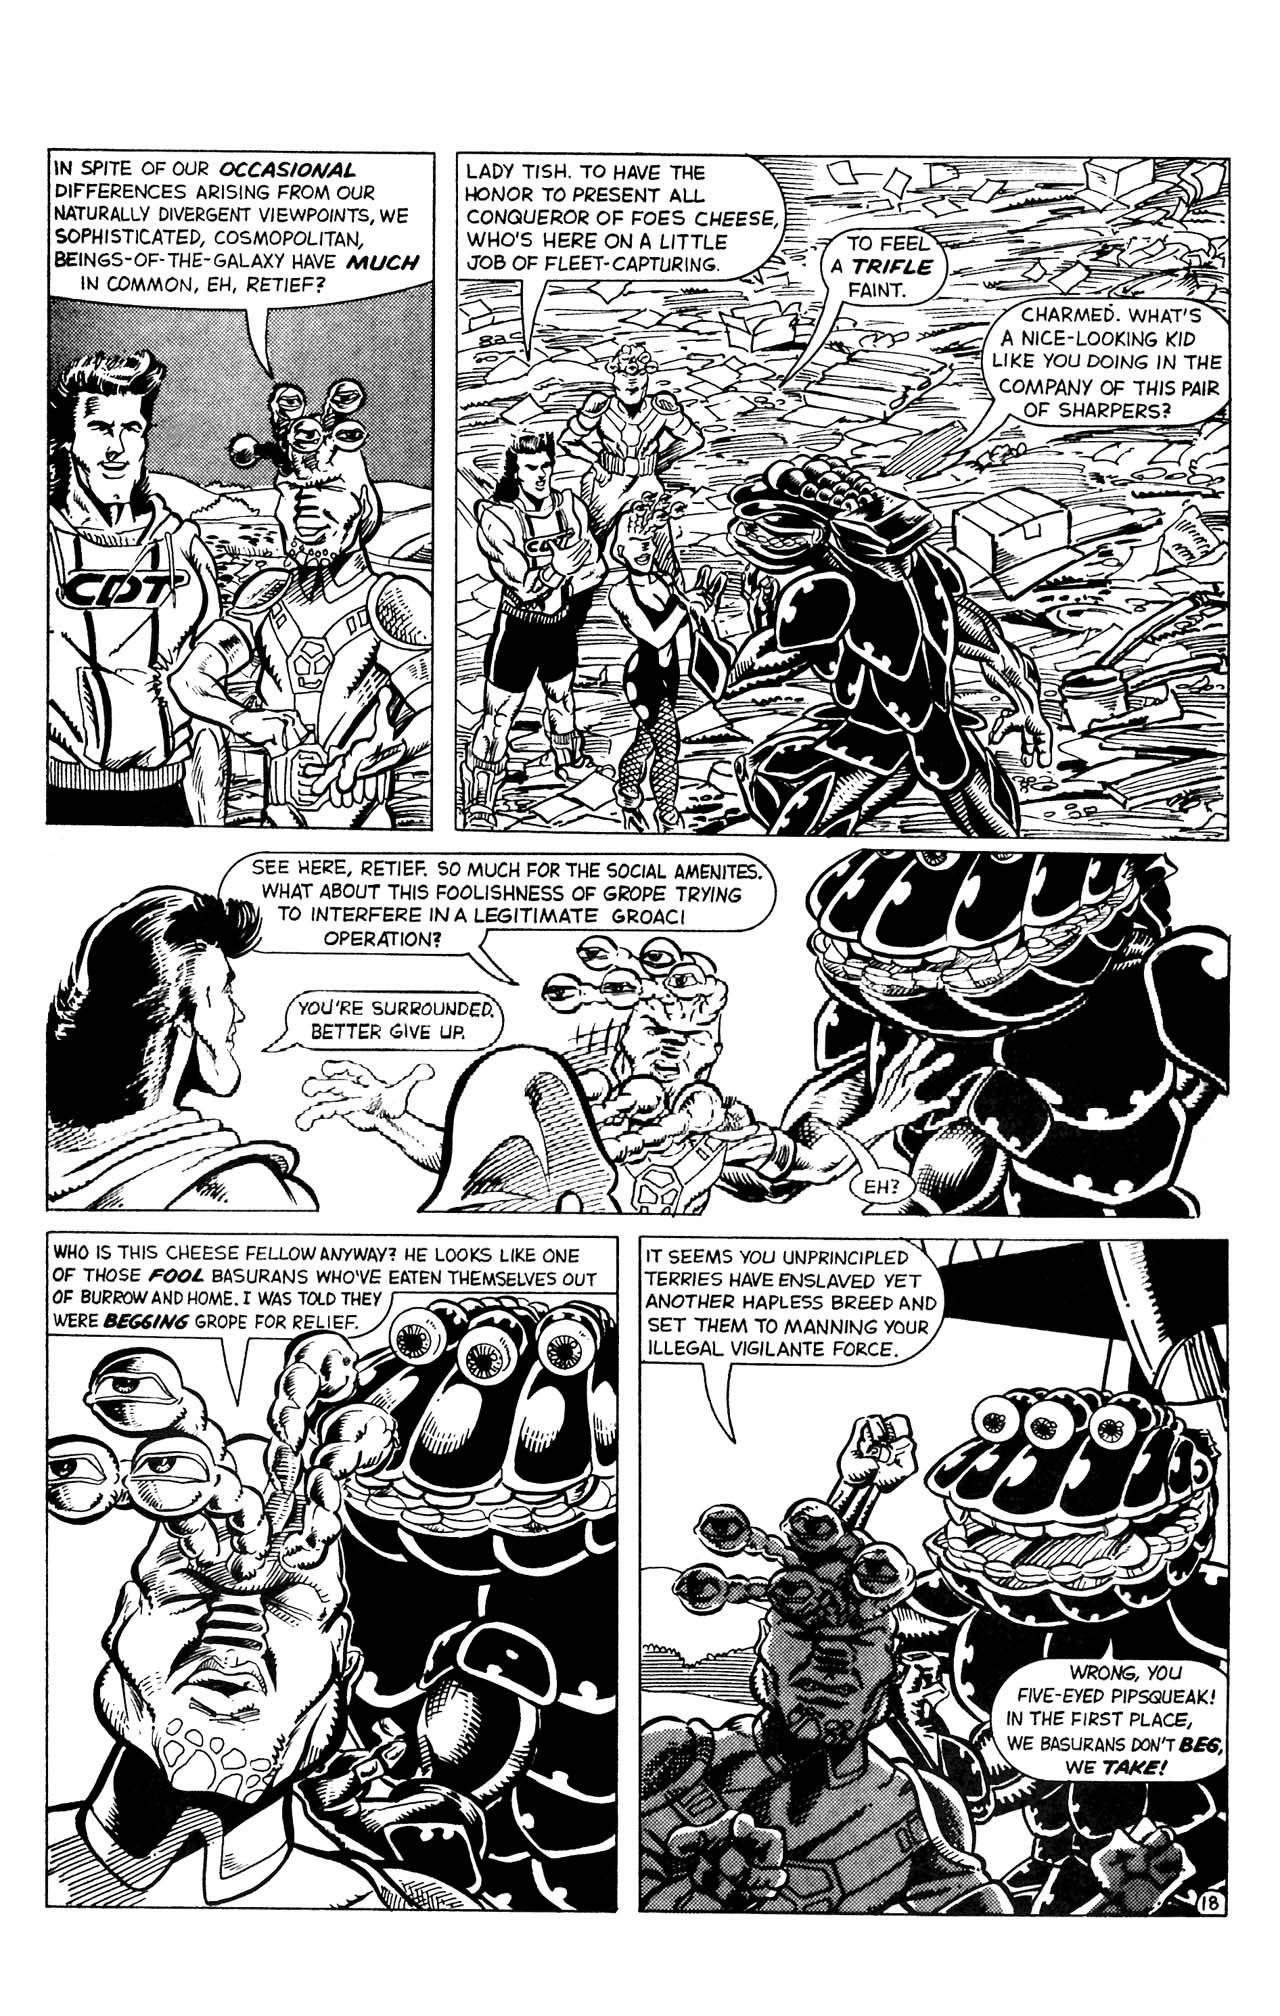 Read online Retief: The Garbage Invasion comic -  Issue # Full - 22